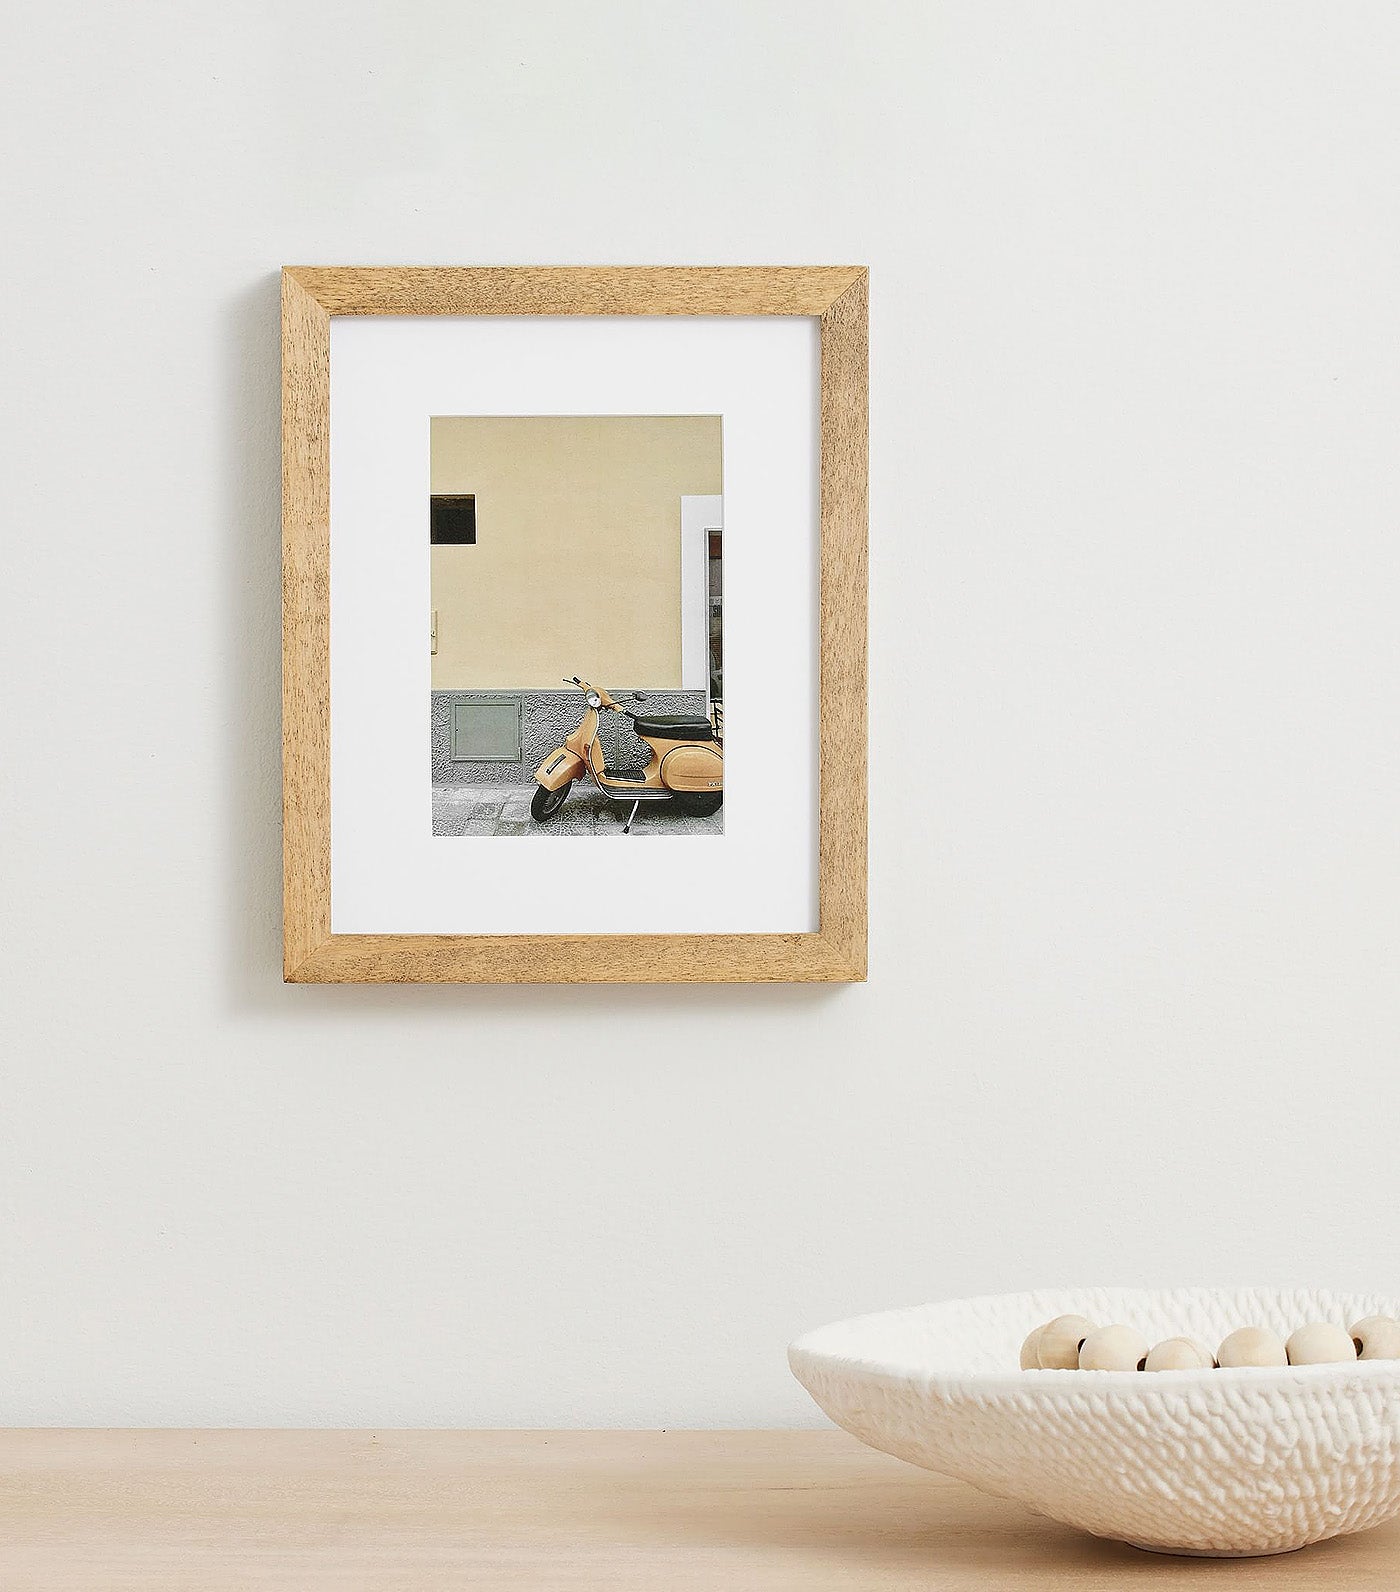 Pottery Barn Wood Gallery Frames - Natural